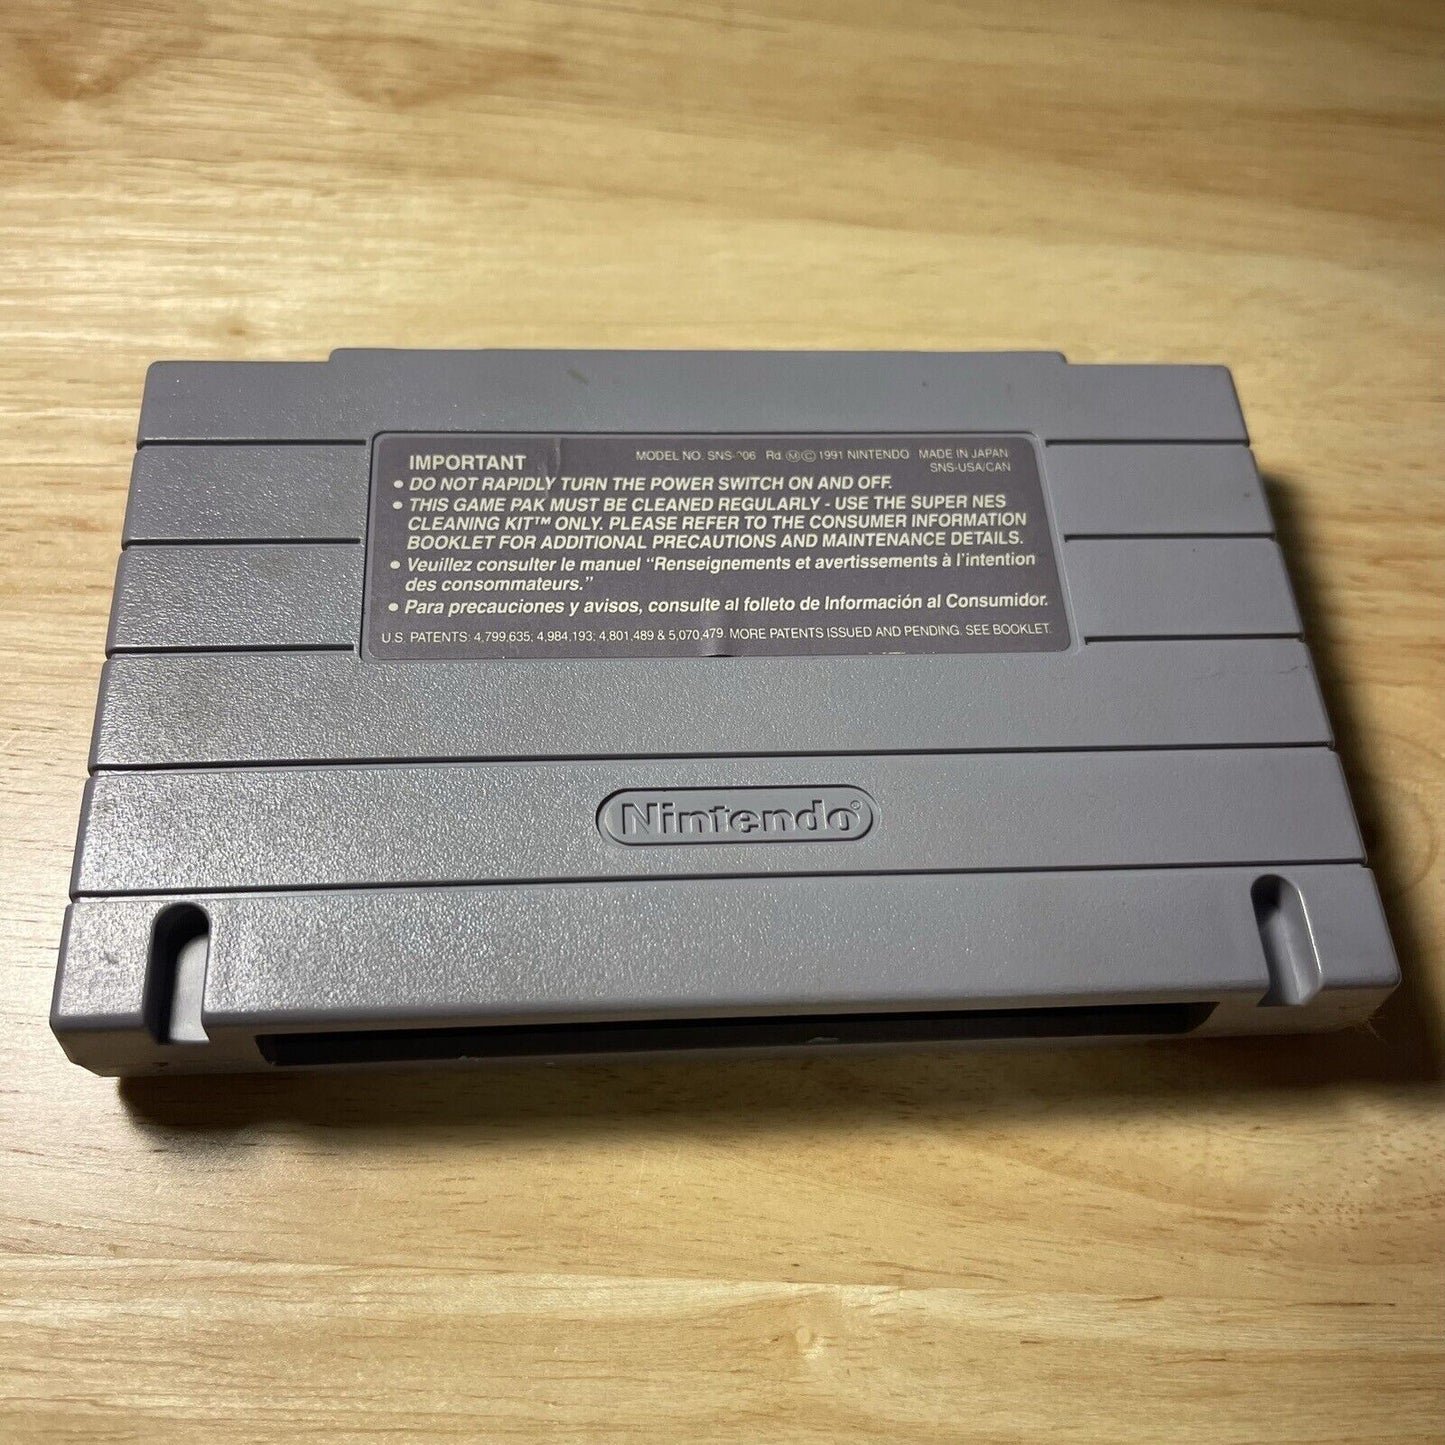 STAR FOX Super Nintendo Entertainment SNES 1991 Game Cartridge Only - Tested -